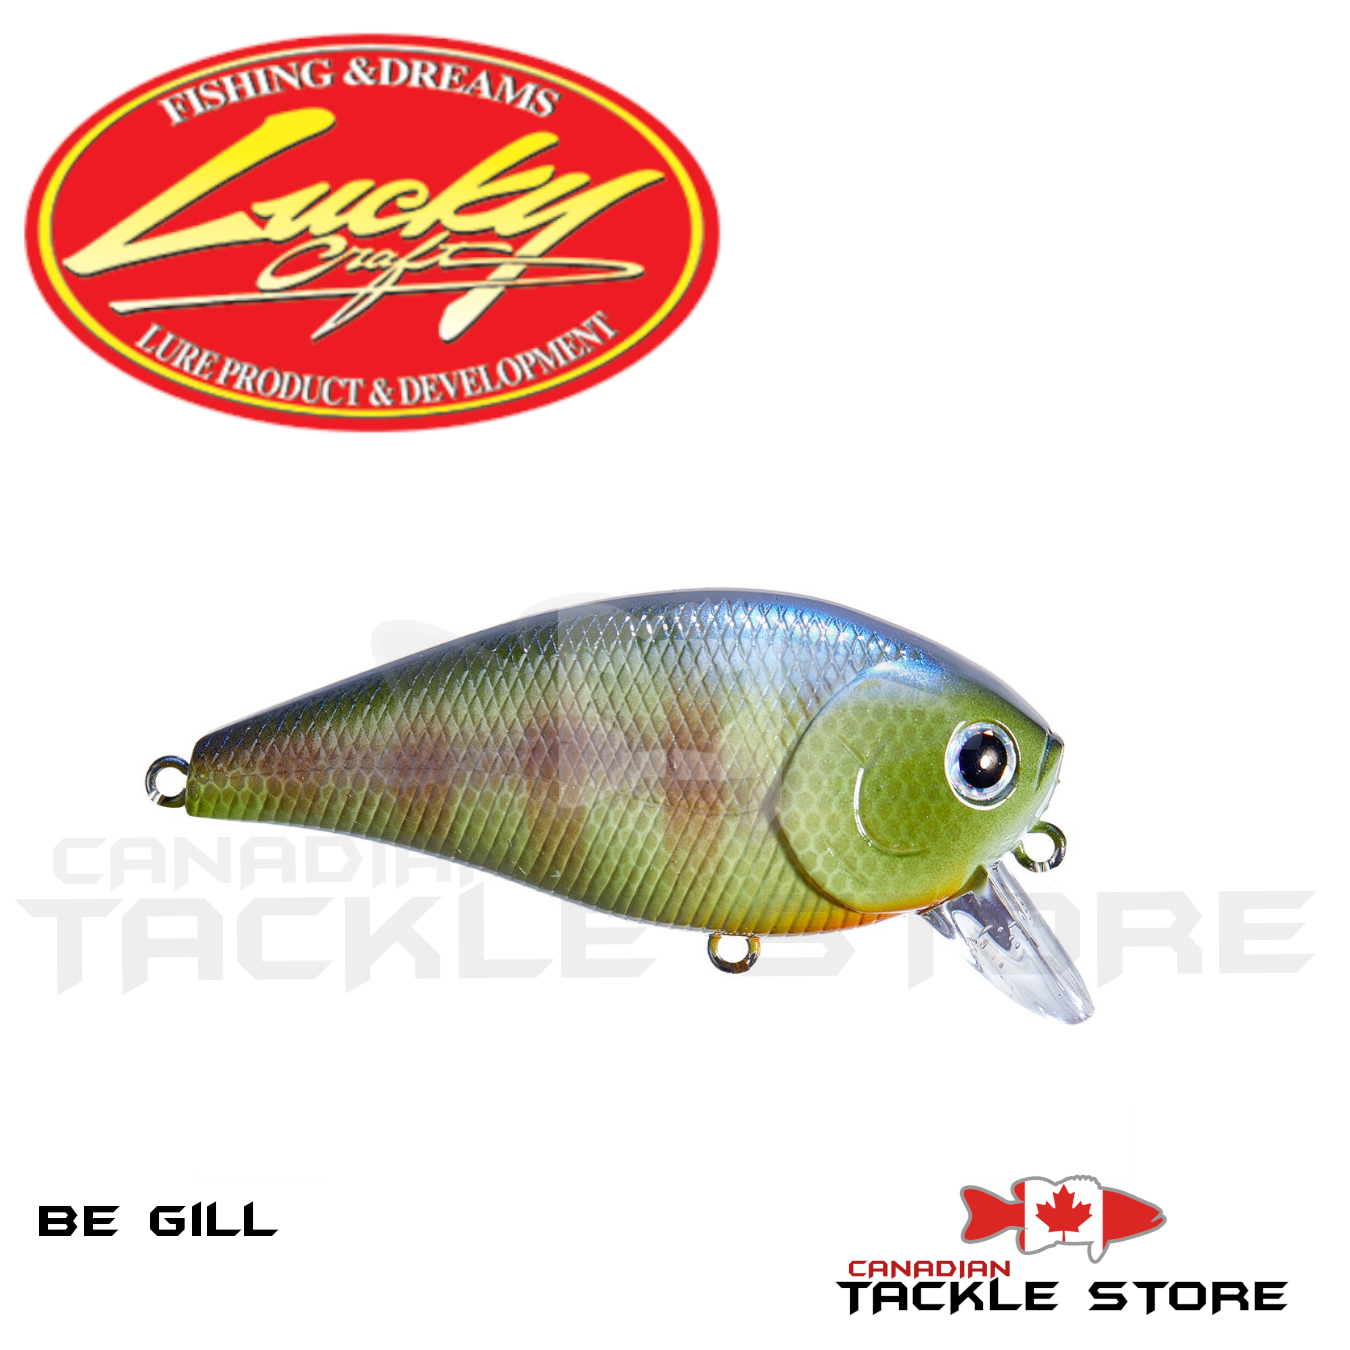 Japanese Lures – Canadian Tackle Store